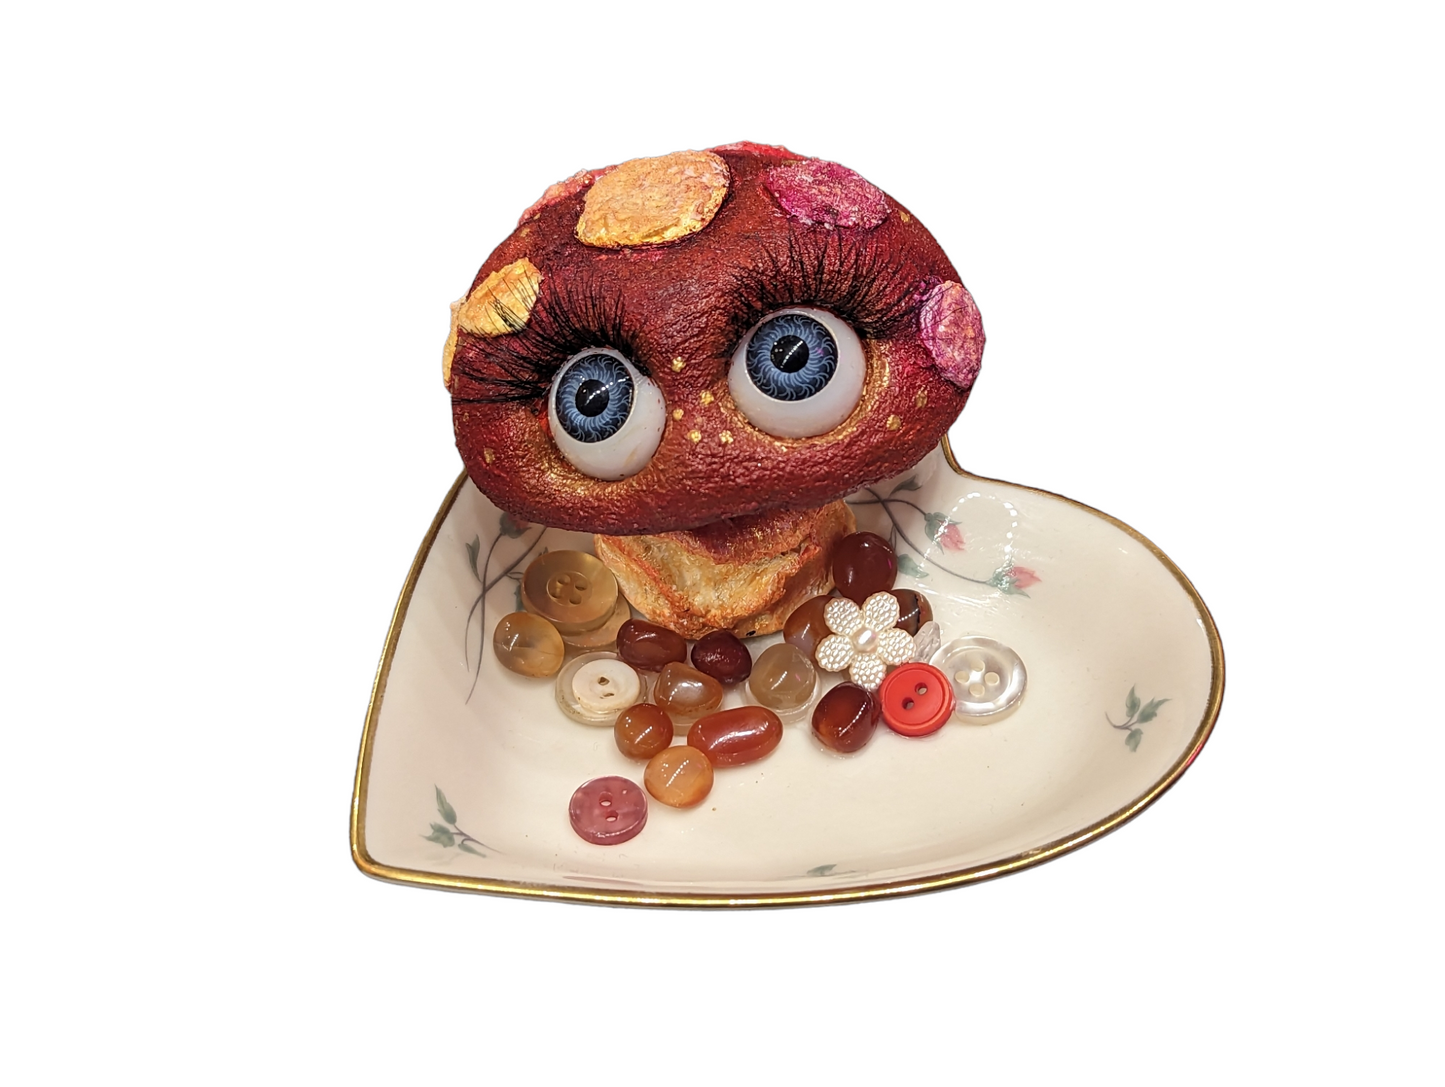 Handmade Heart Dish Mushie by The Cracked Porcelain Doll